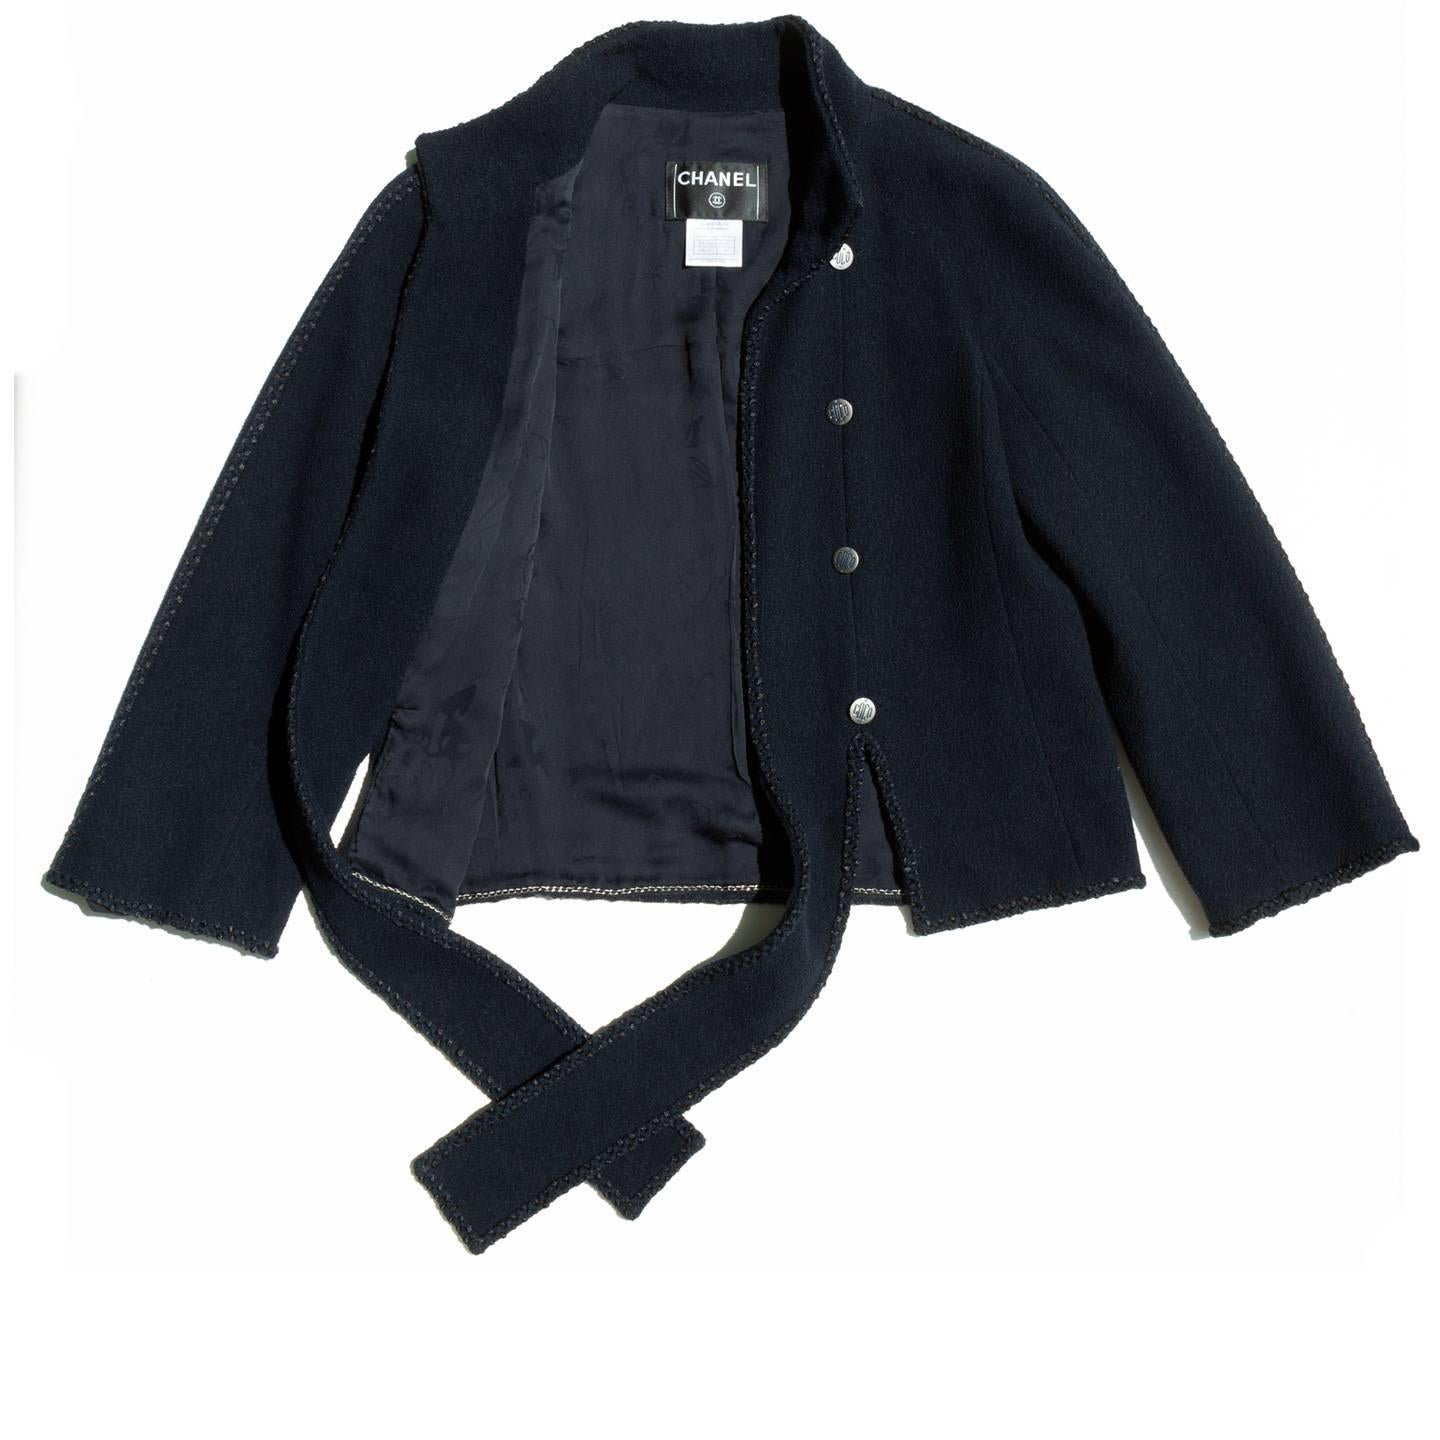 From Chanel's 2008 Cruise line, navy wool blend cropped jacket with 